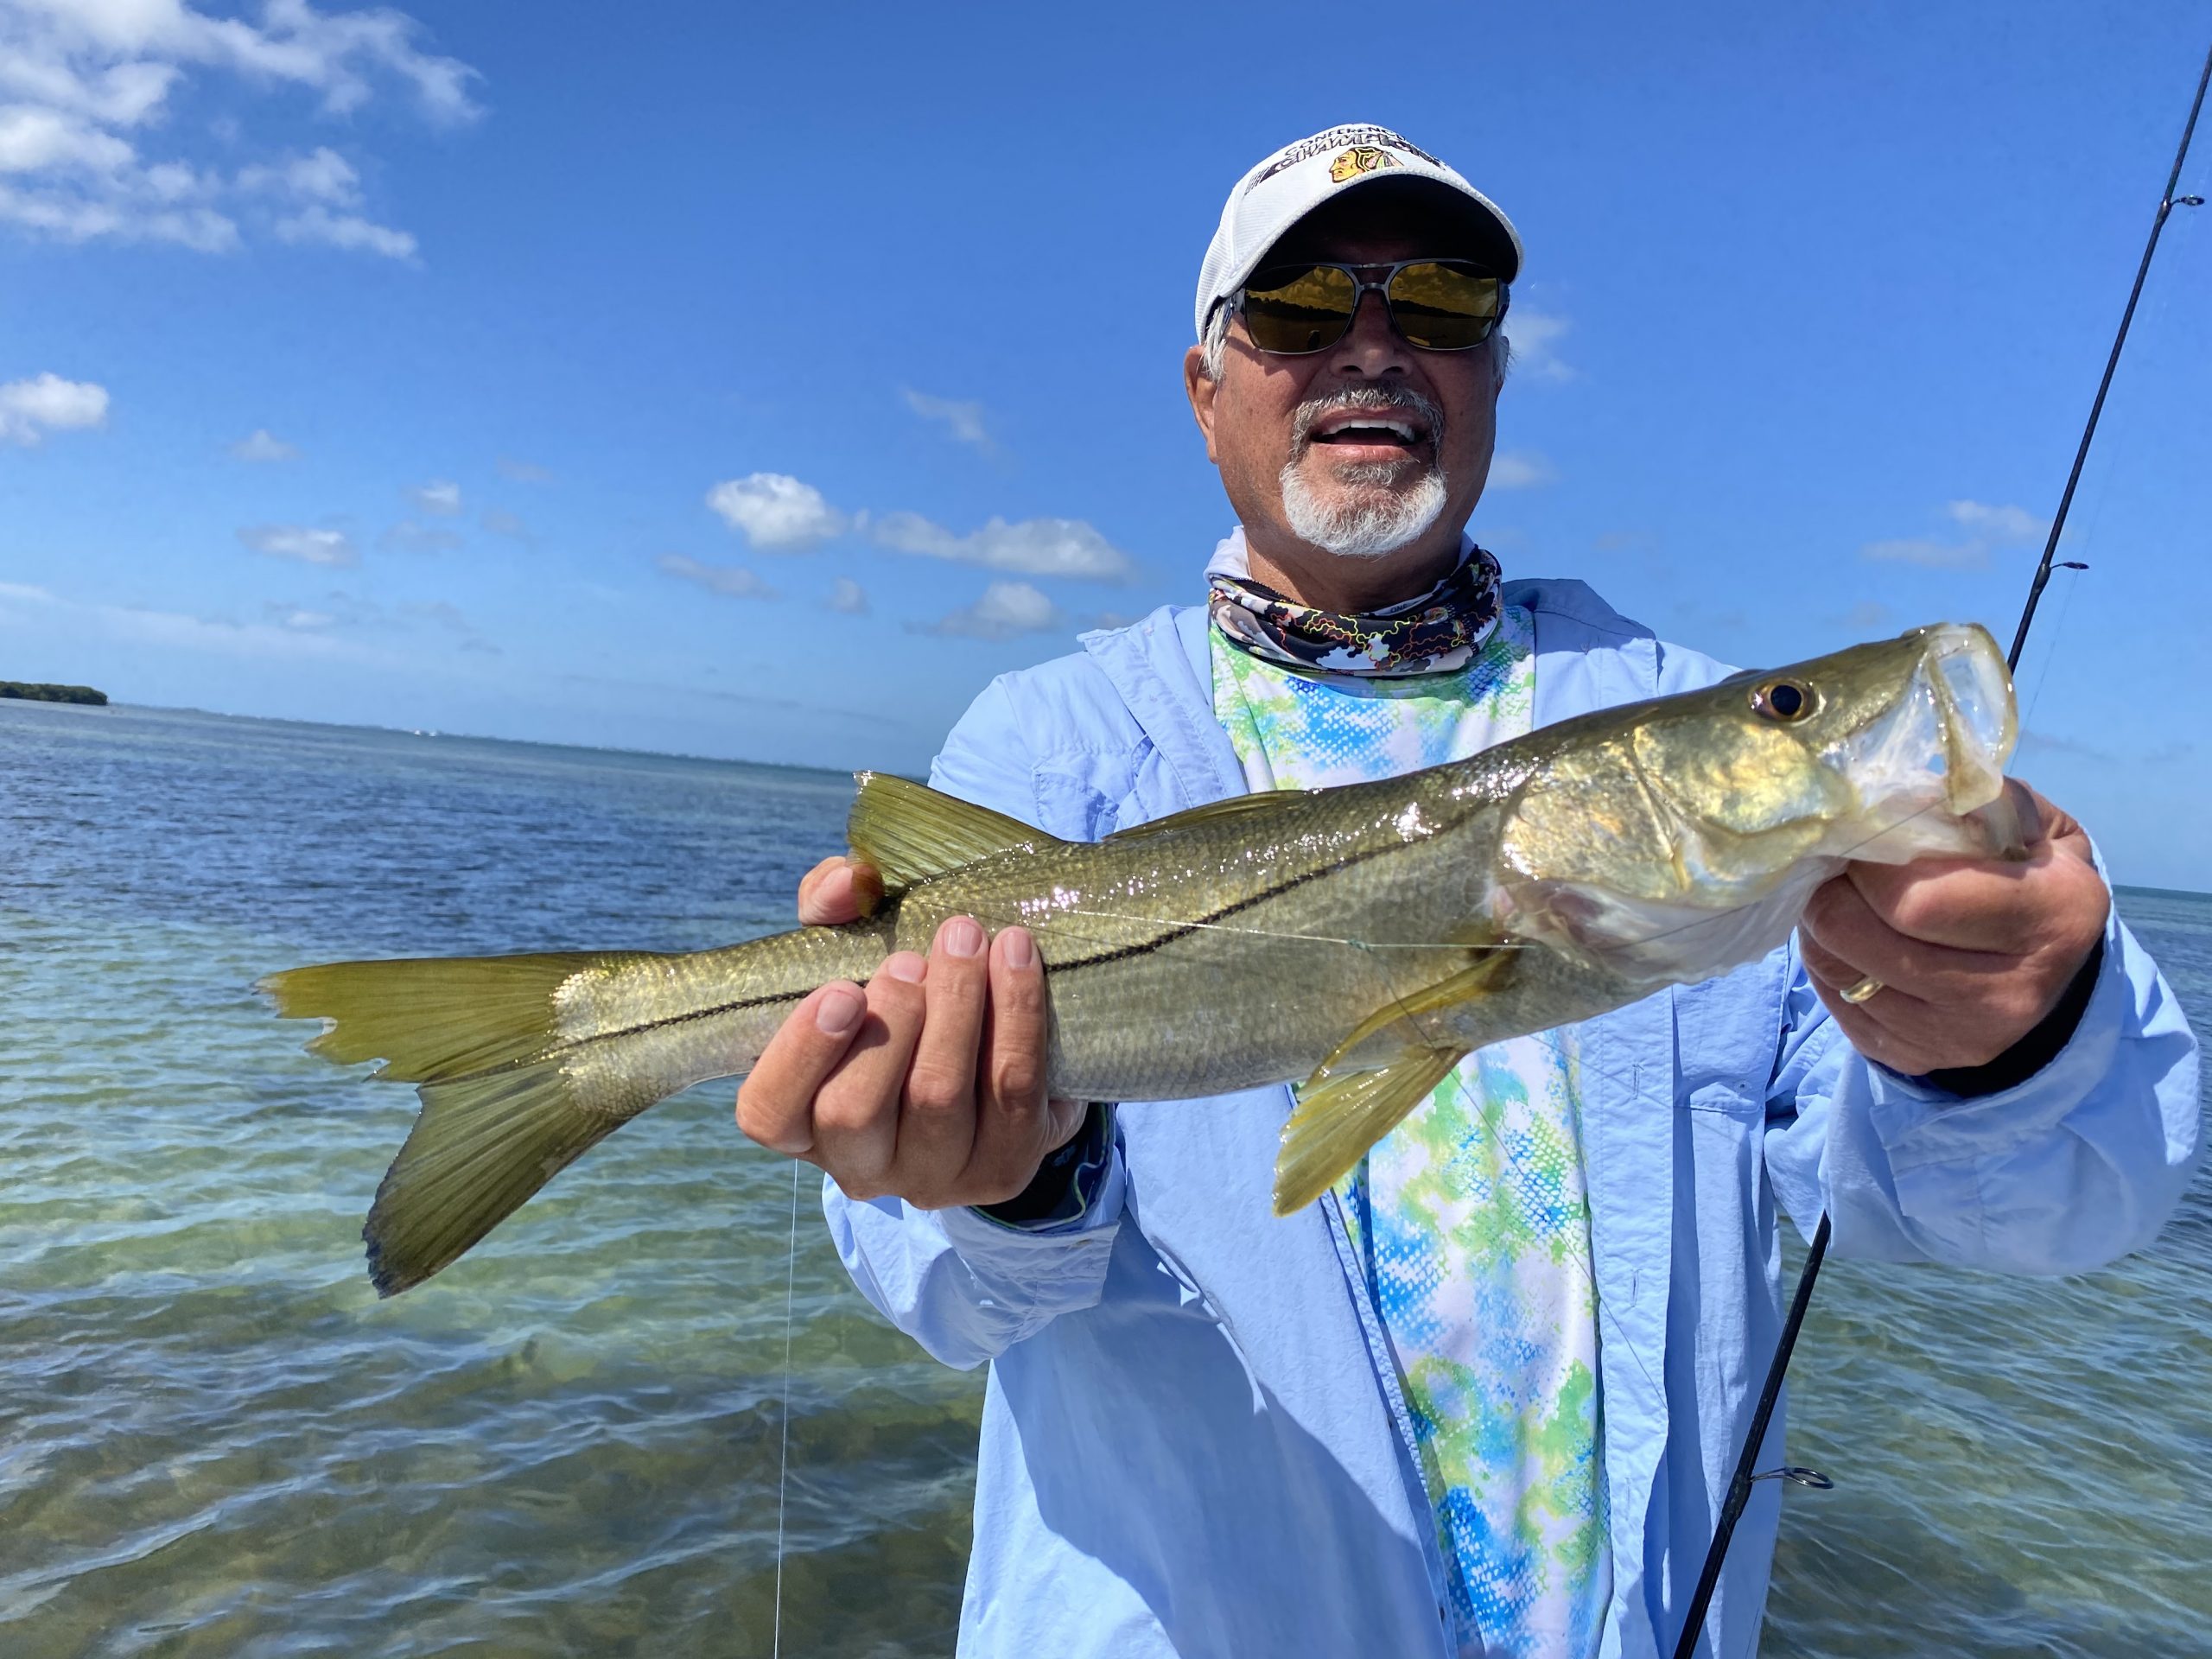 A snook caught by an angler is held out to the camera